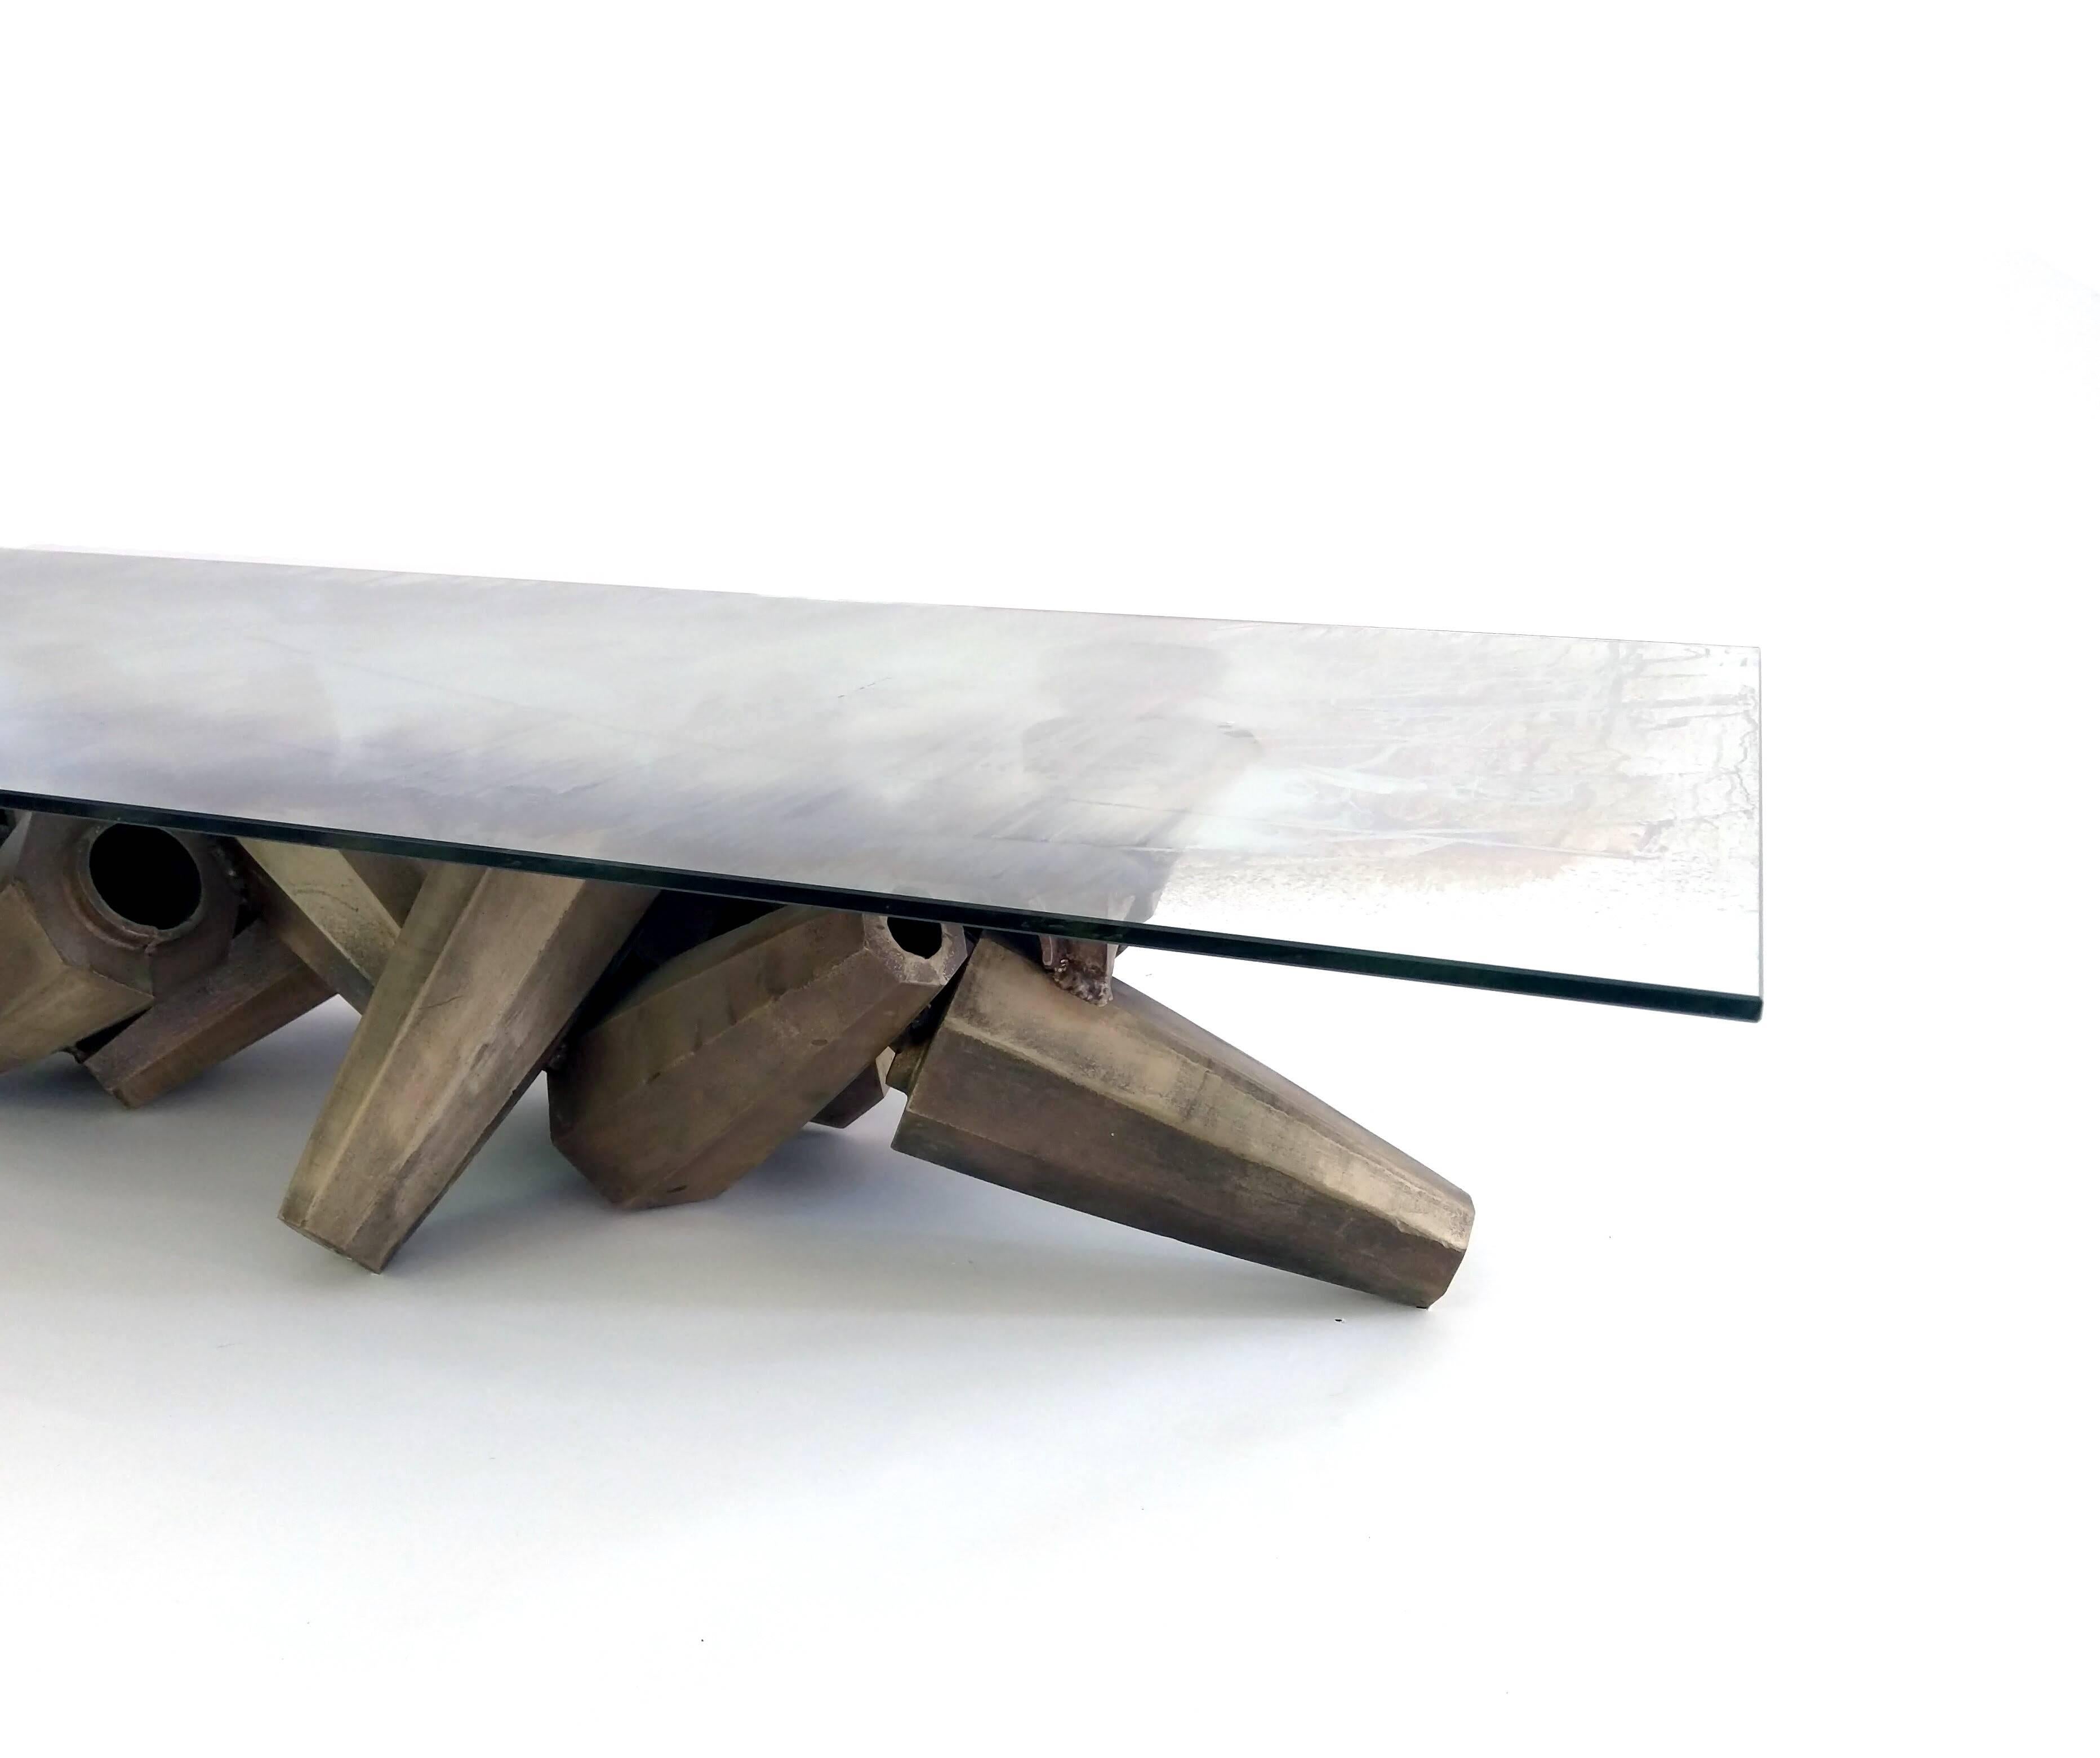 Gregory Nangle
Chaos Table, 2015-18
Silvered glass and silicon cast bronze
65 x 30 x 12 in

Chaos Table is a Brutalist style coffee table made by Philadelphia artist/designer Gregory Nangle. It is made of a 1950s vintage fused Italian cream glass